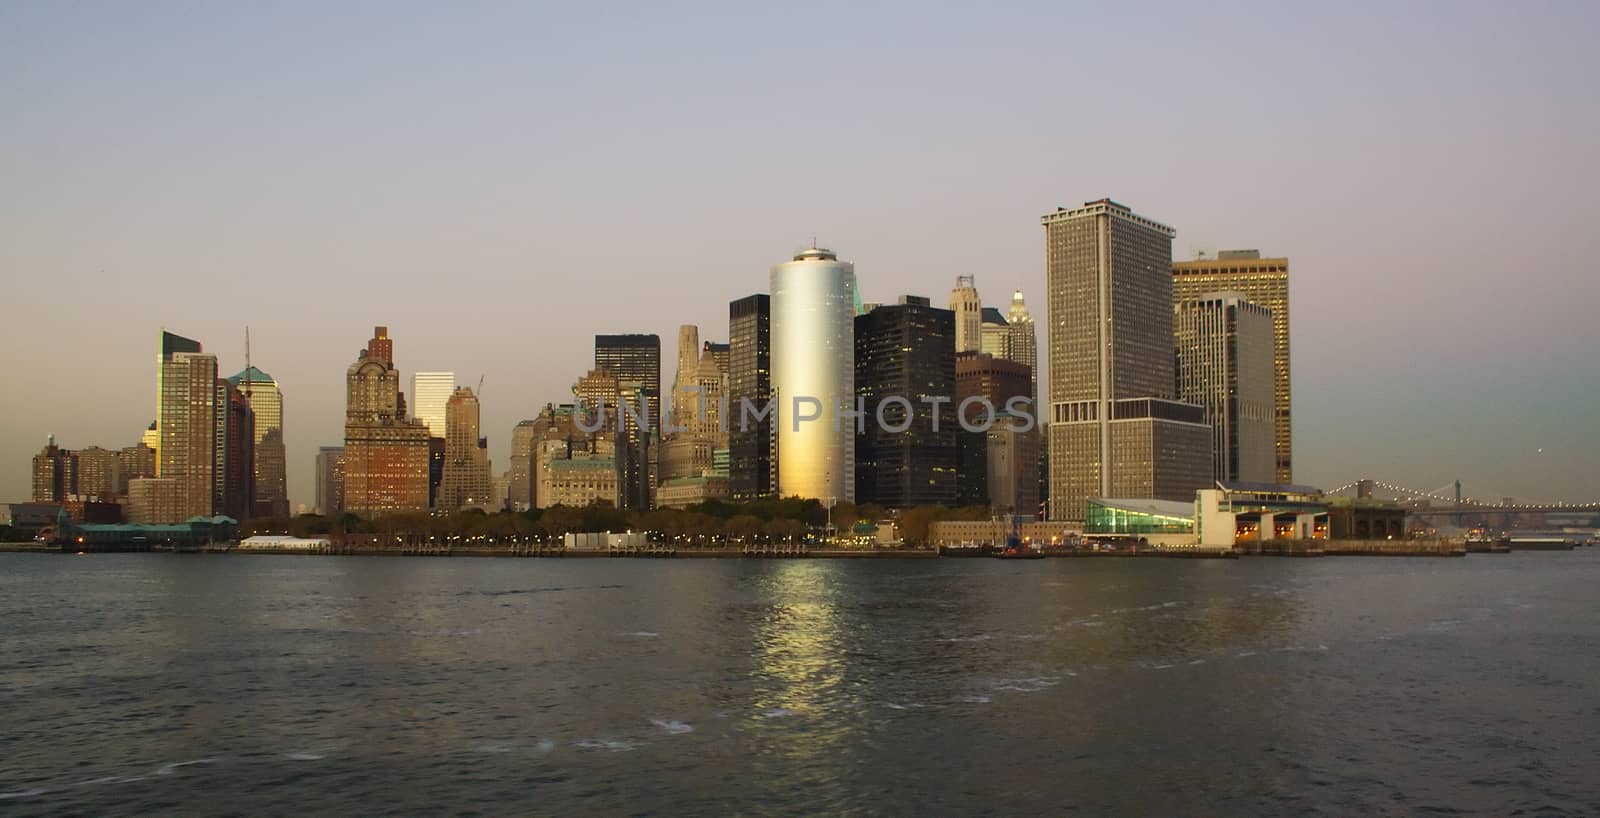 Southmost point of Manhattan, taken from the river